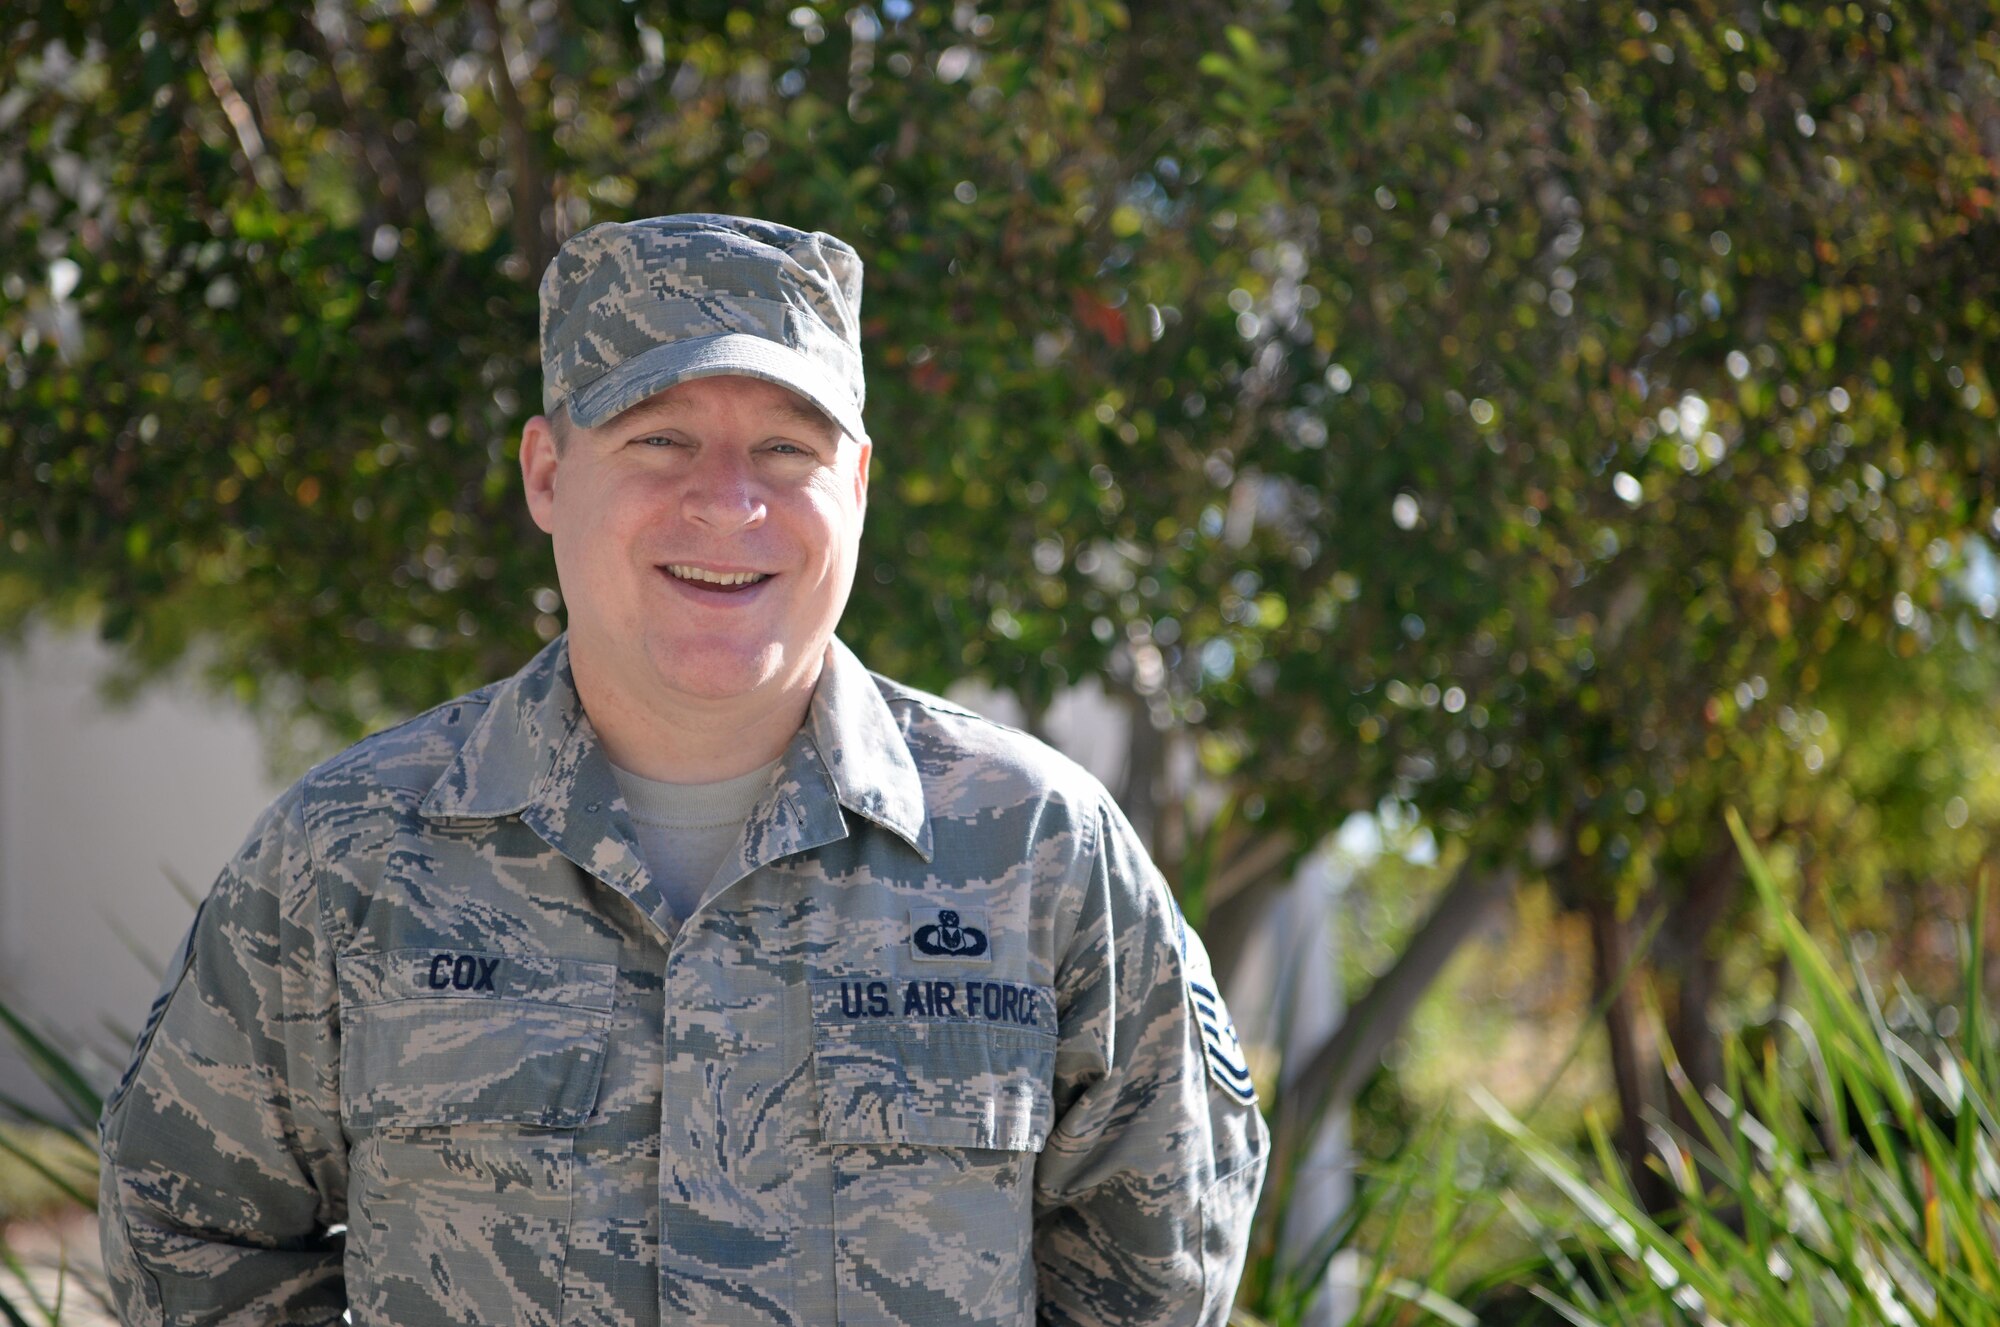 Senior Master Sgt. Eric D. Cox, 9th Force Support Squadron career assistance advisor, poses for a photo Oct. 18, 2016, at Beale Air Force Base, Calif. (U.S. Air Force photo/Airman Tristan D. Viglianco)